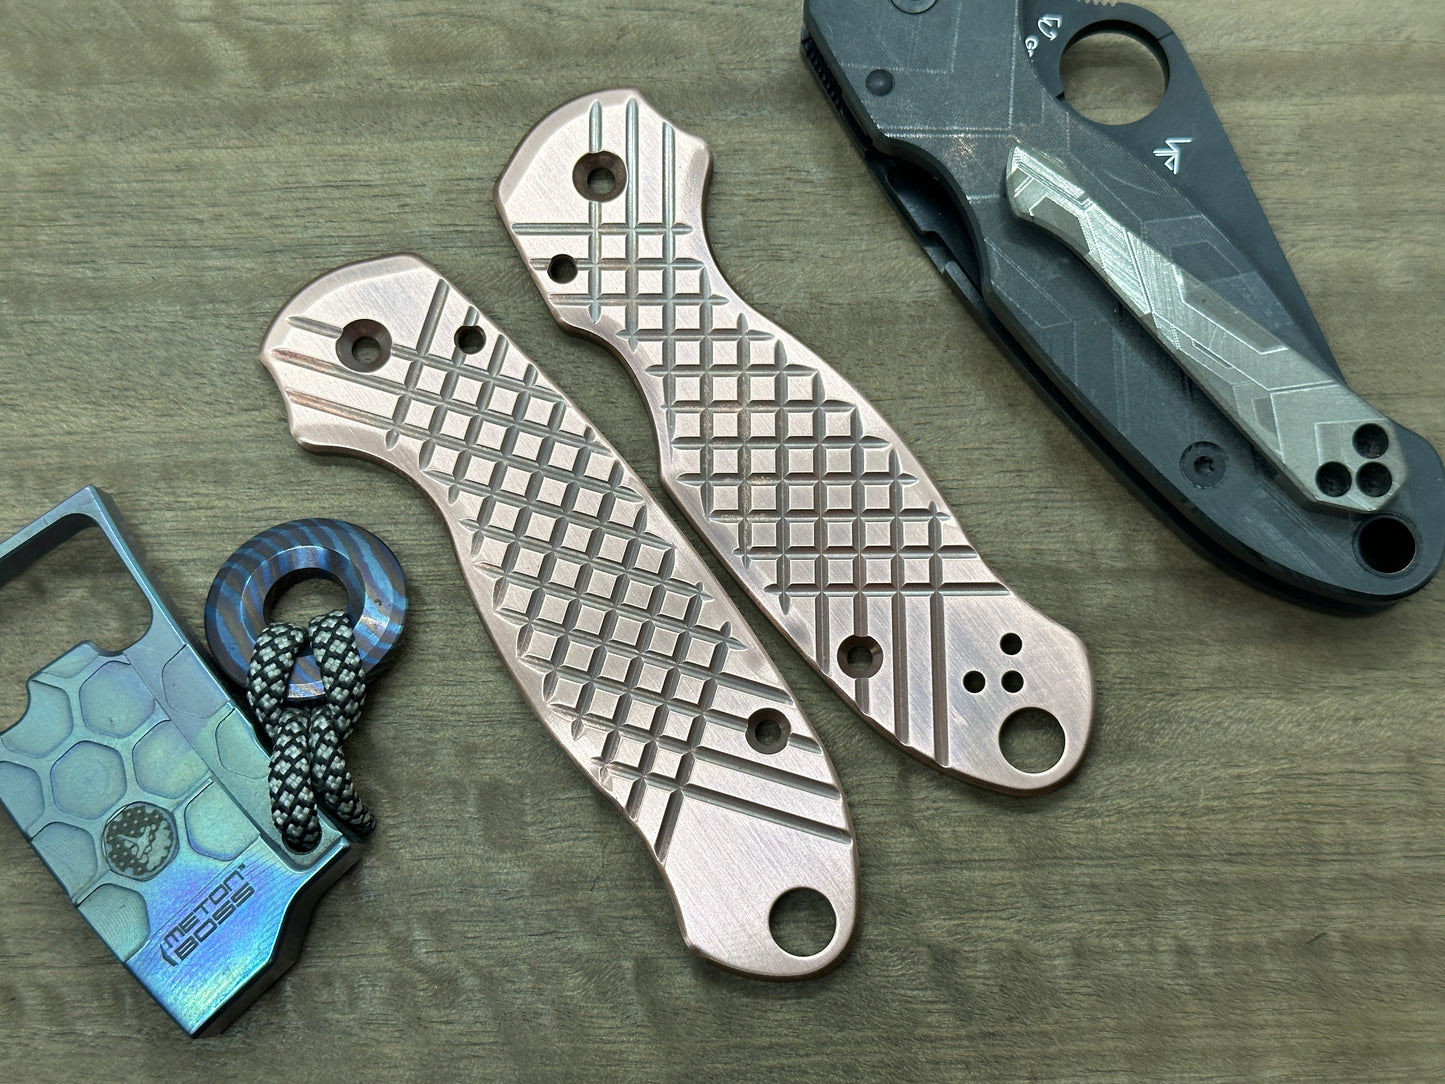 FRAG Cnc milled 2-Tone Dark & Brushed Copper Scales for Spyderco Para 3